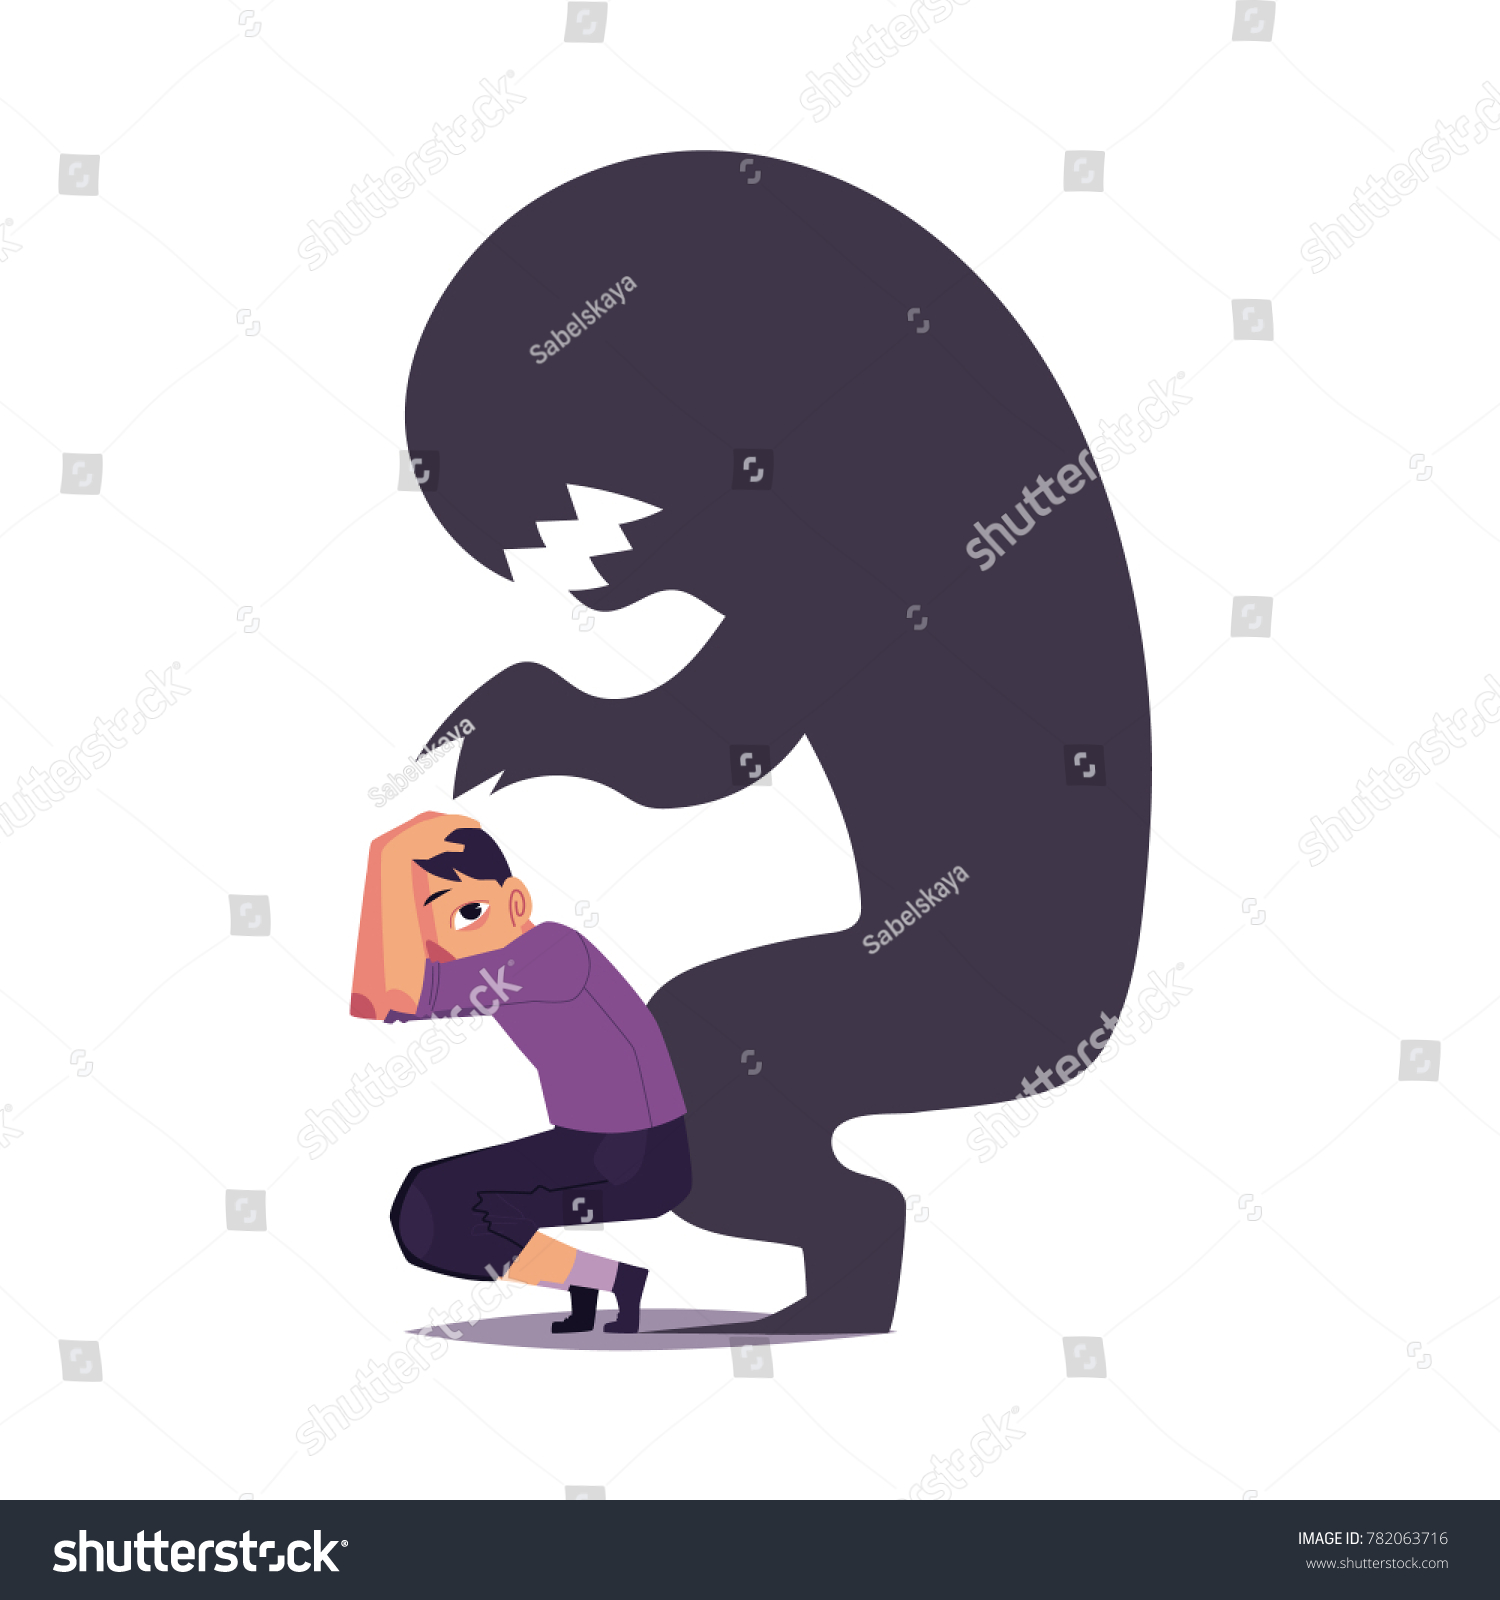 Fear Phobia Shown Scary Black Monster Stock Vector (Royalty Free) 782063716